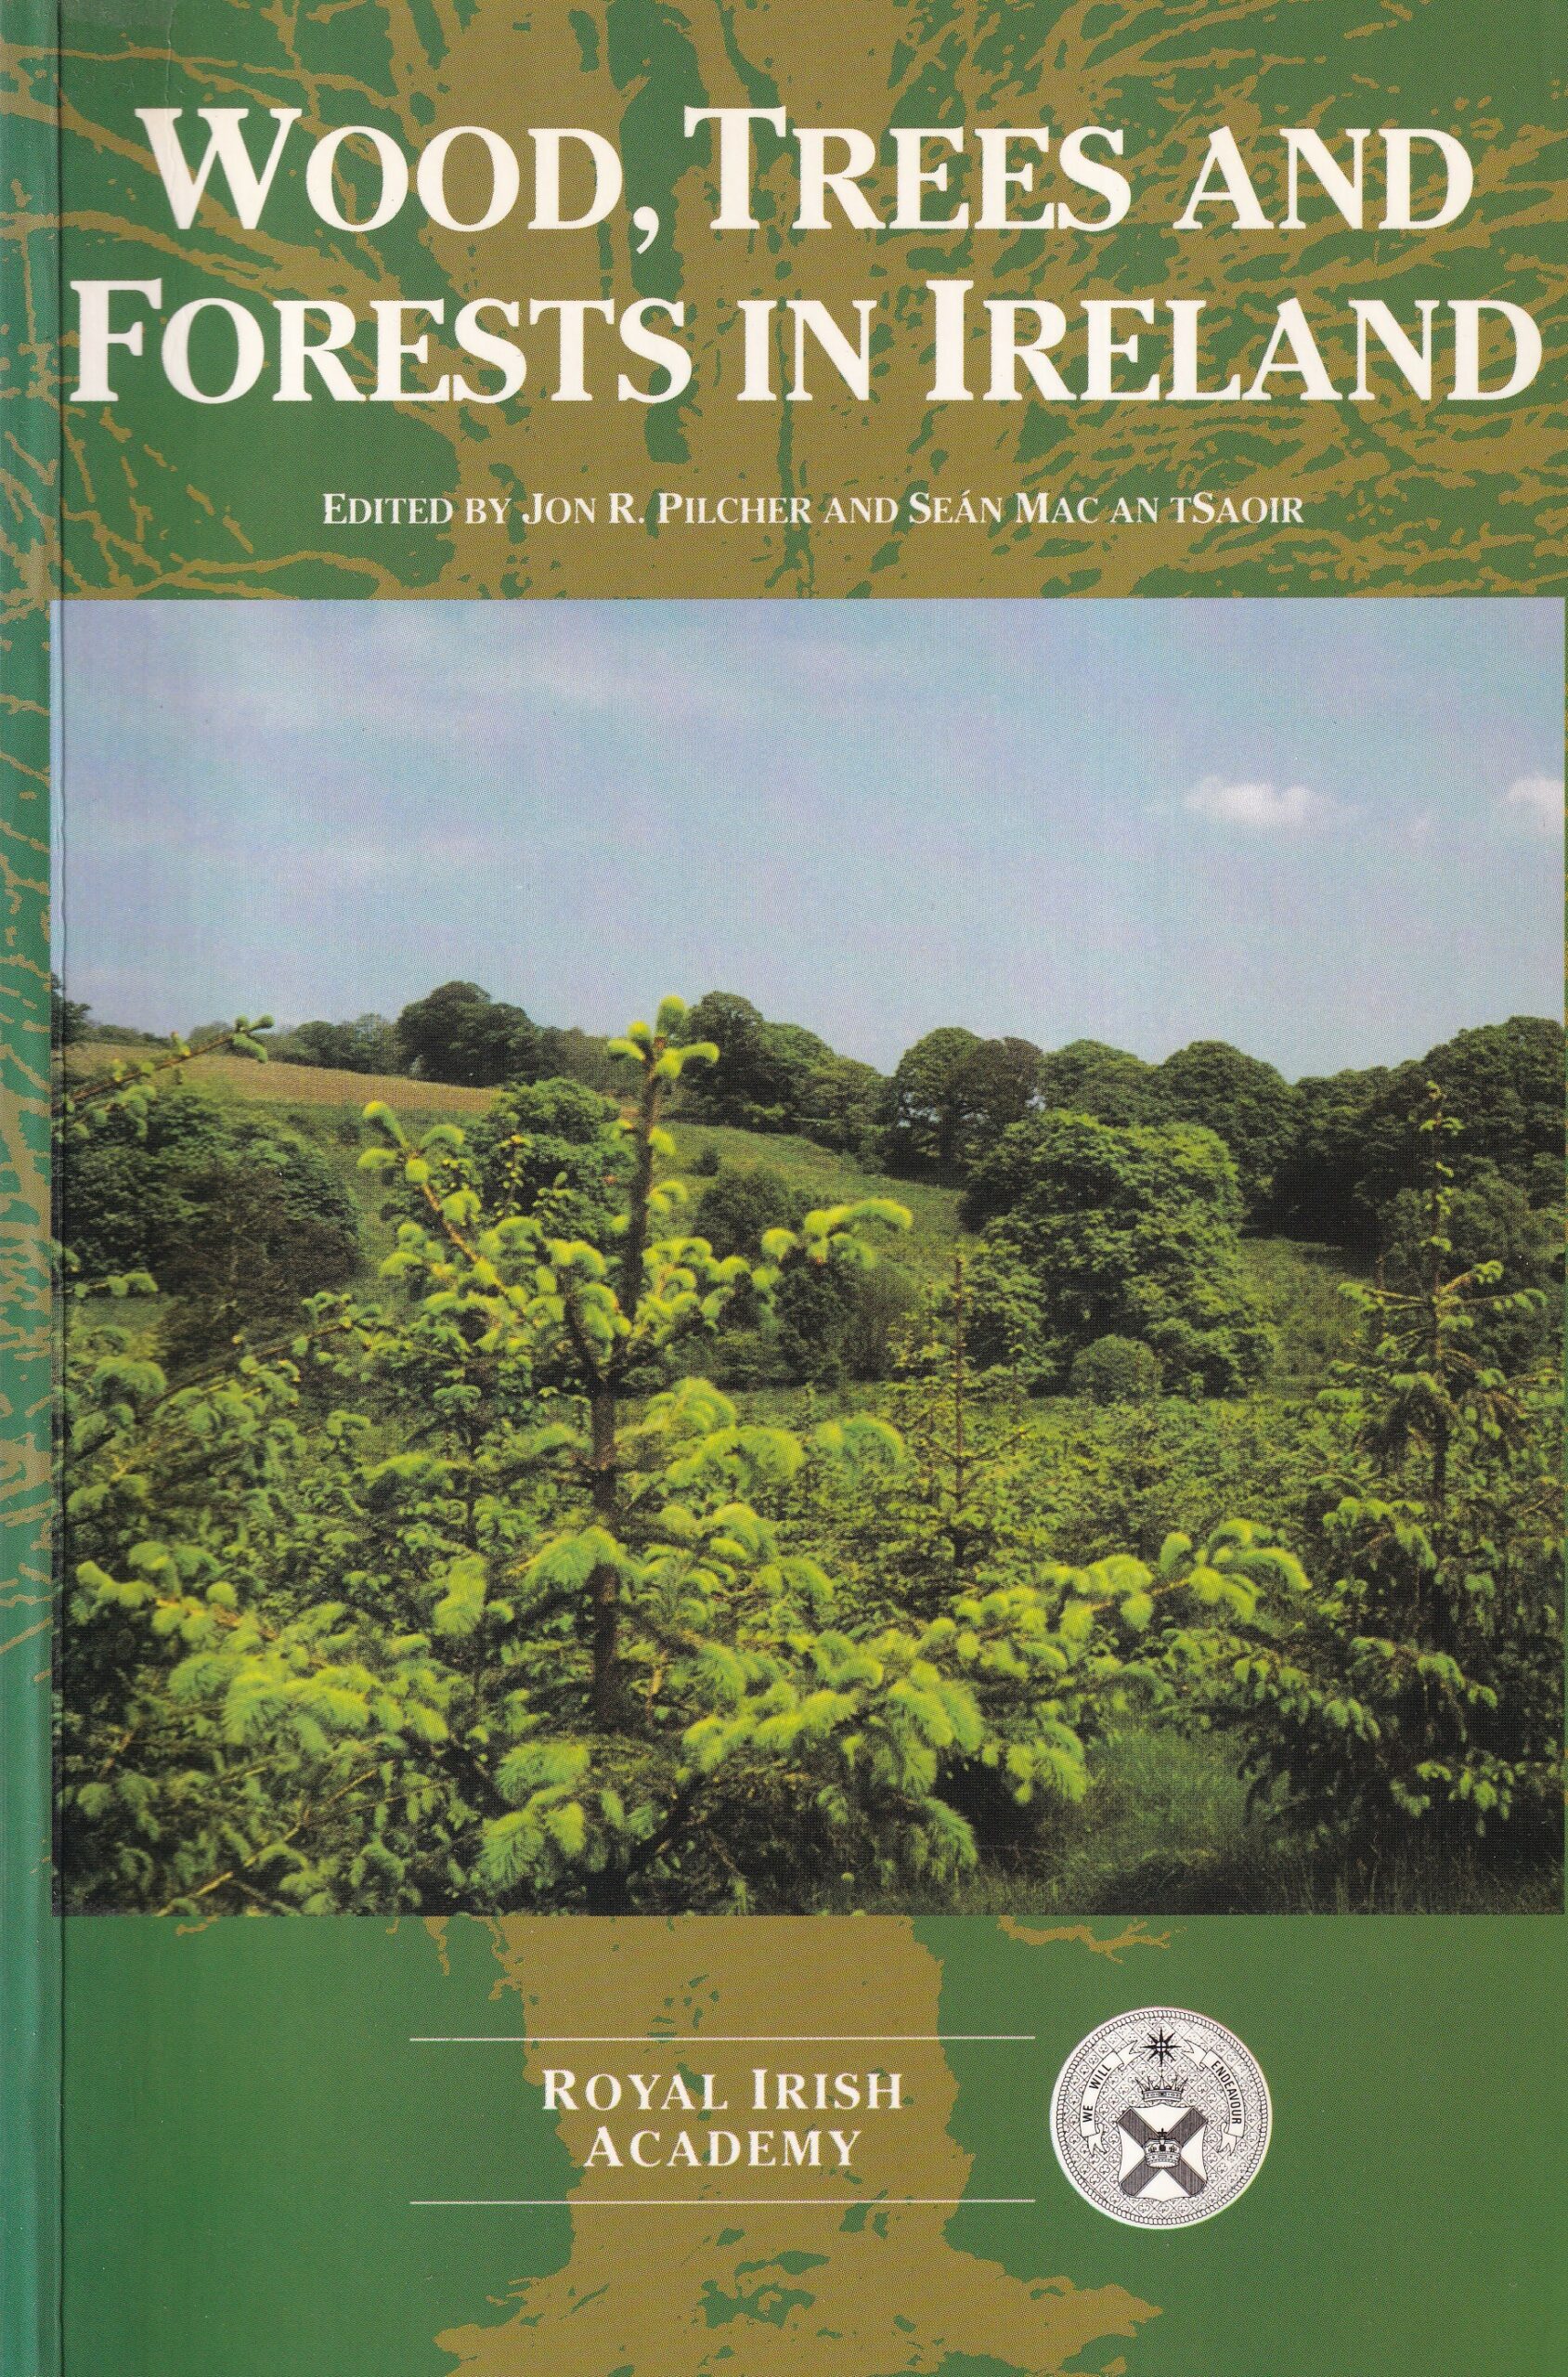 Wood, Trees and Forests in Ireland by Jon R. Pilcher and Seán Mac An tSaoir (eds.)